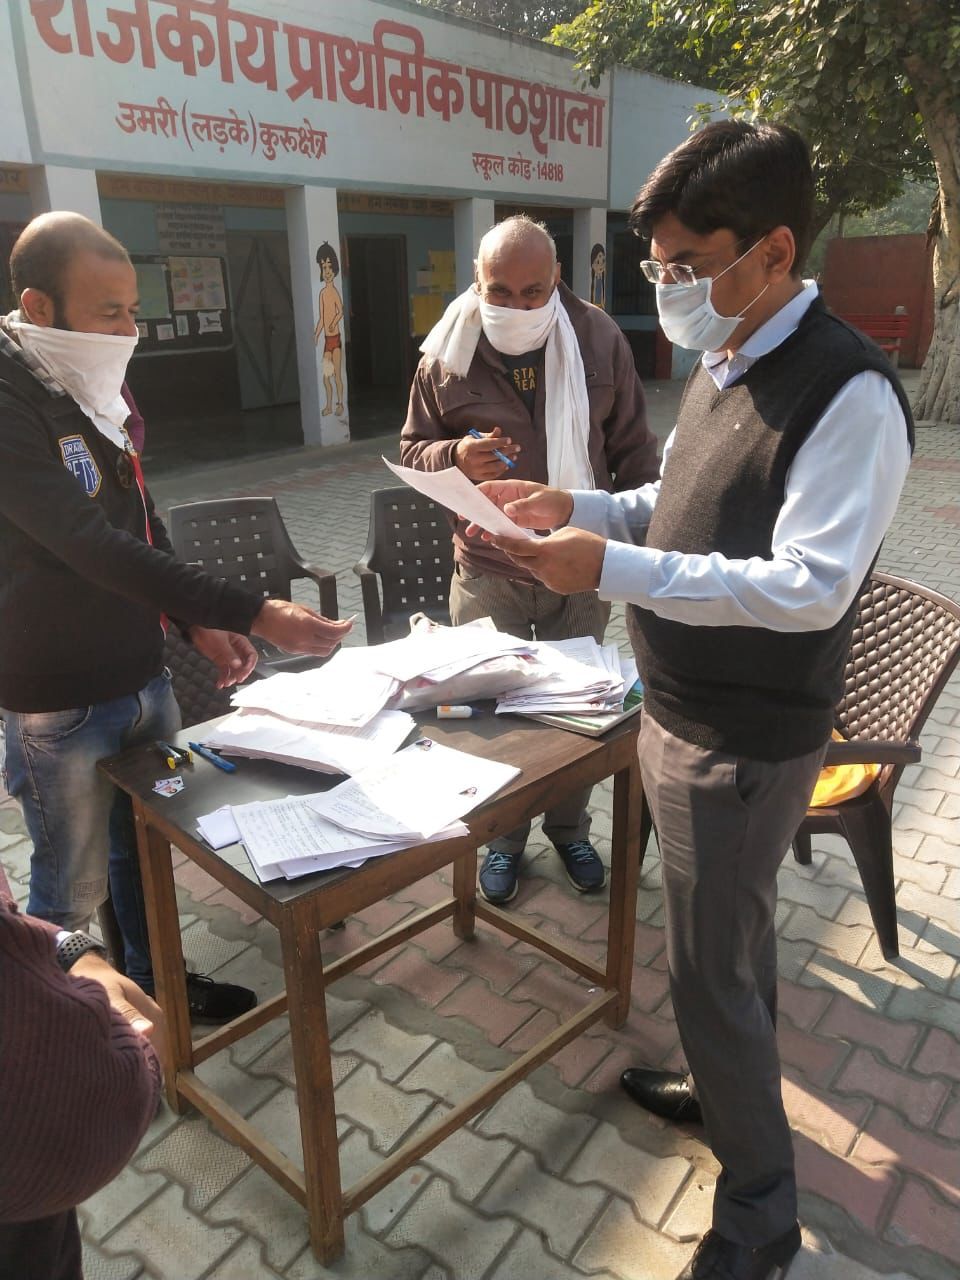 DC kurukshetra inspecting the forms during Special Campaign Day.jpeg